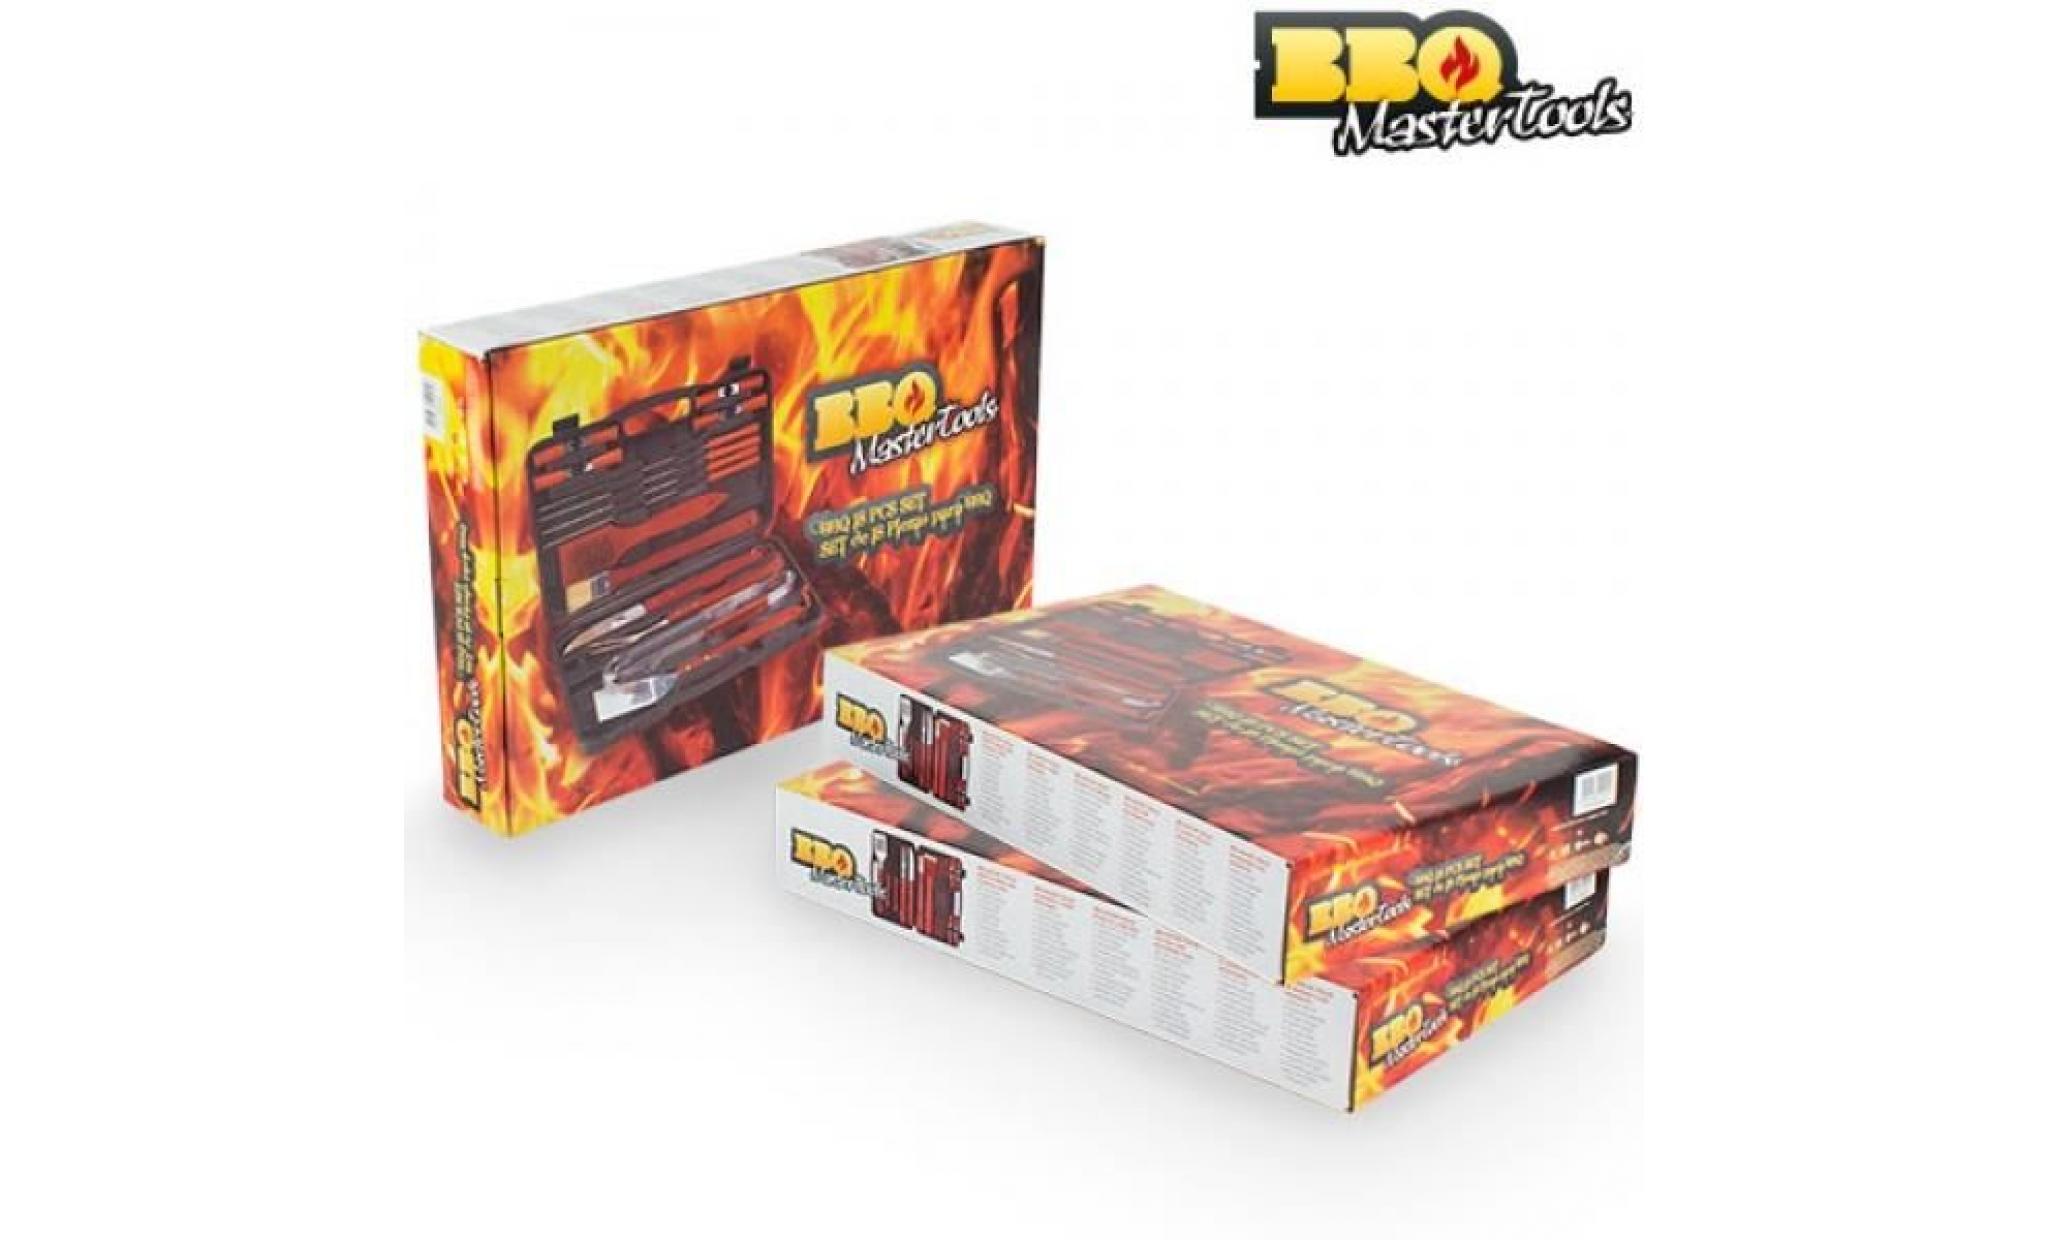 Mallette Ustensiles Barbecue BBQ Master Tools 18 pièces pas cher